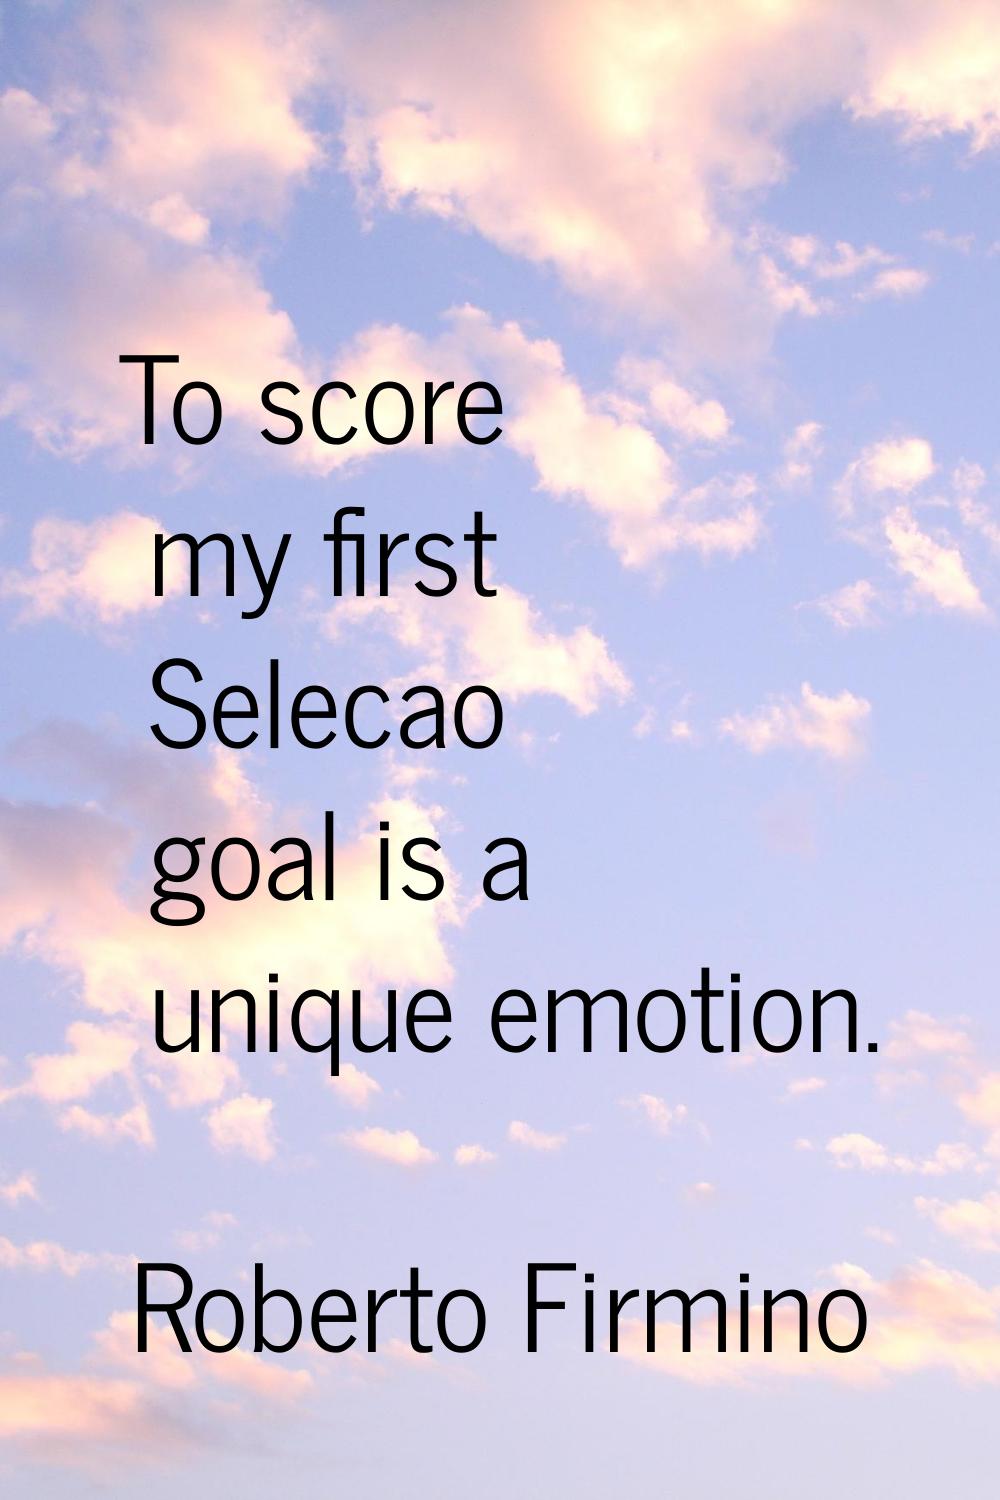 To score my first Selecao goal is a unique emotion.